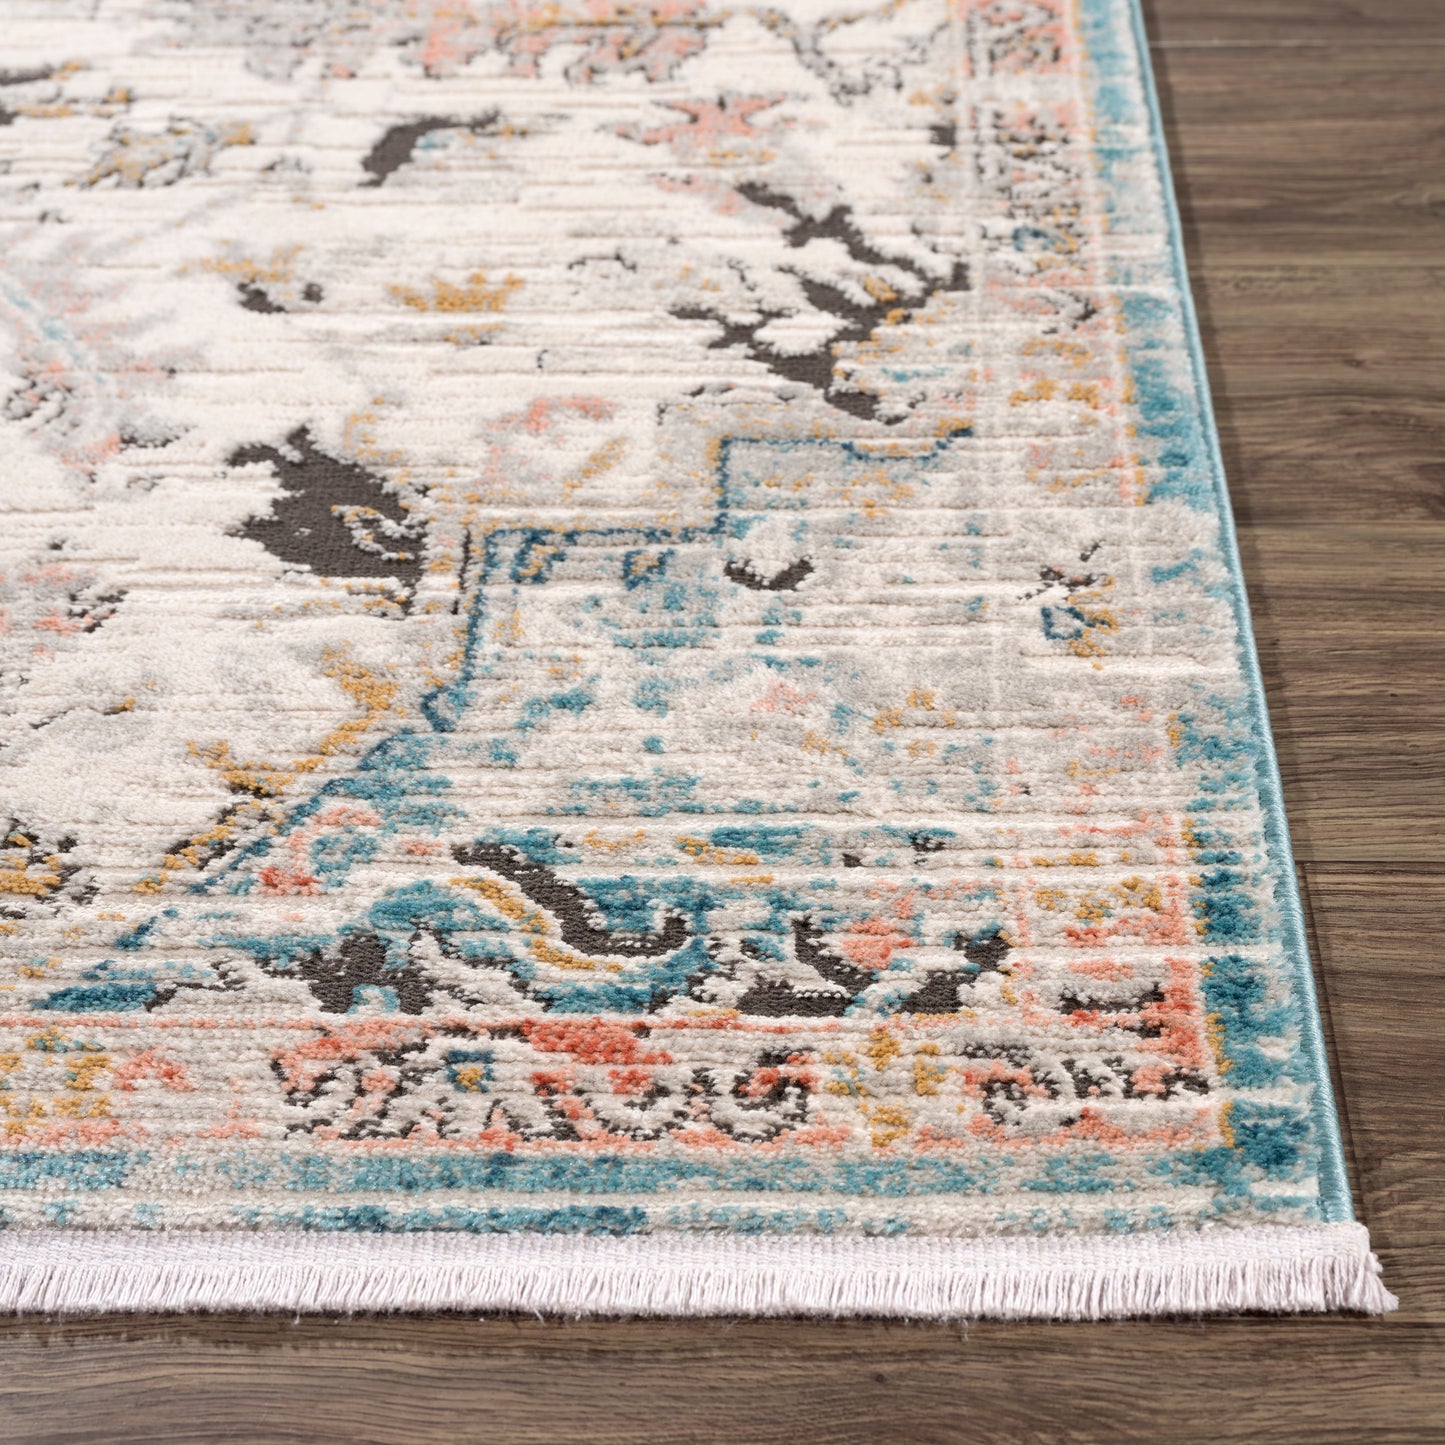 la dole rugs traditional persian oriental distressed teal turquoise ivory grey red orange area rug 8x10, 8x11 ft Large Living Room Carpet, Bedroom, Kitchen